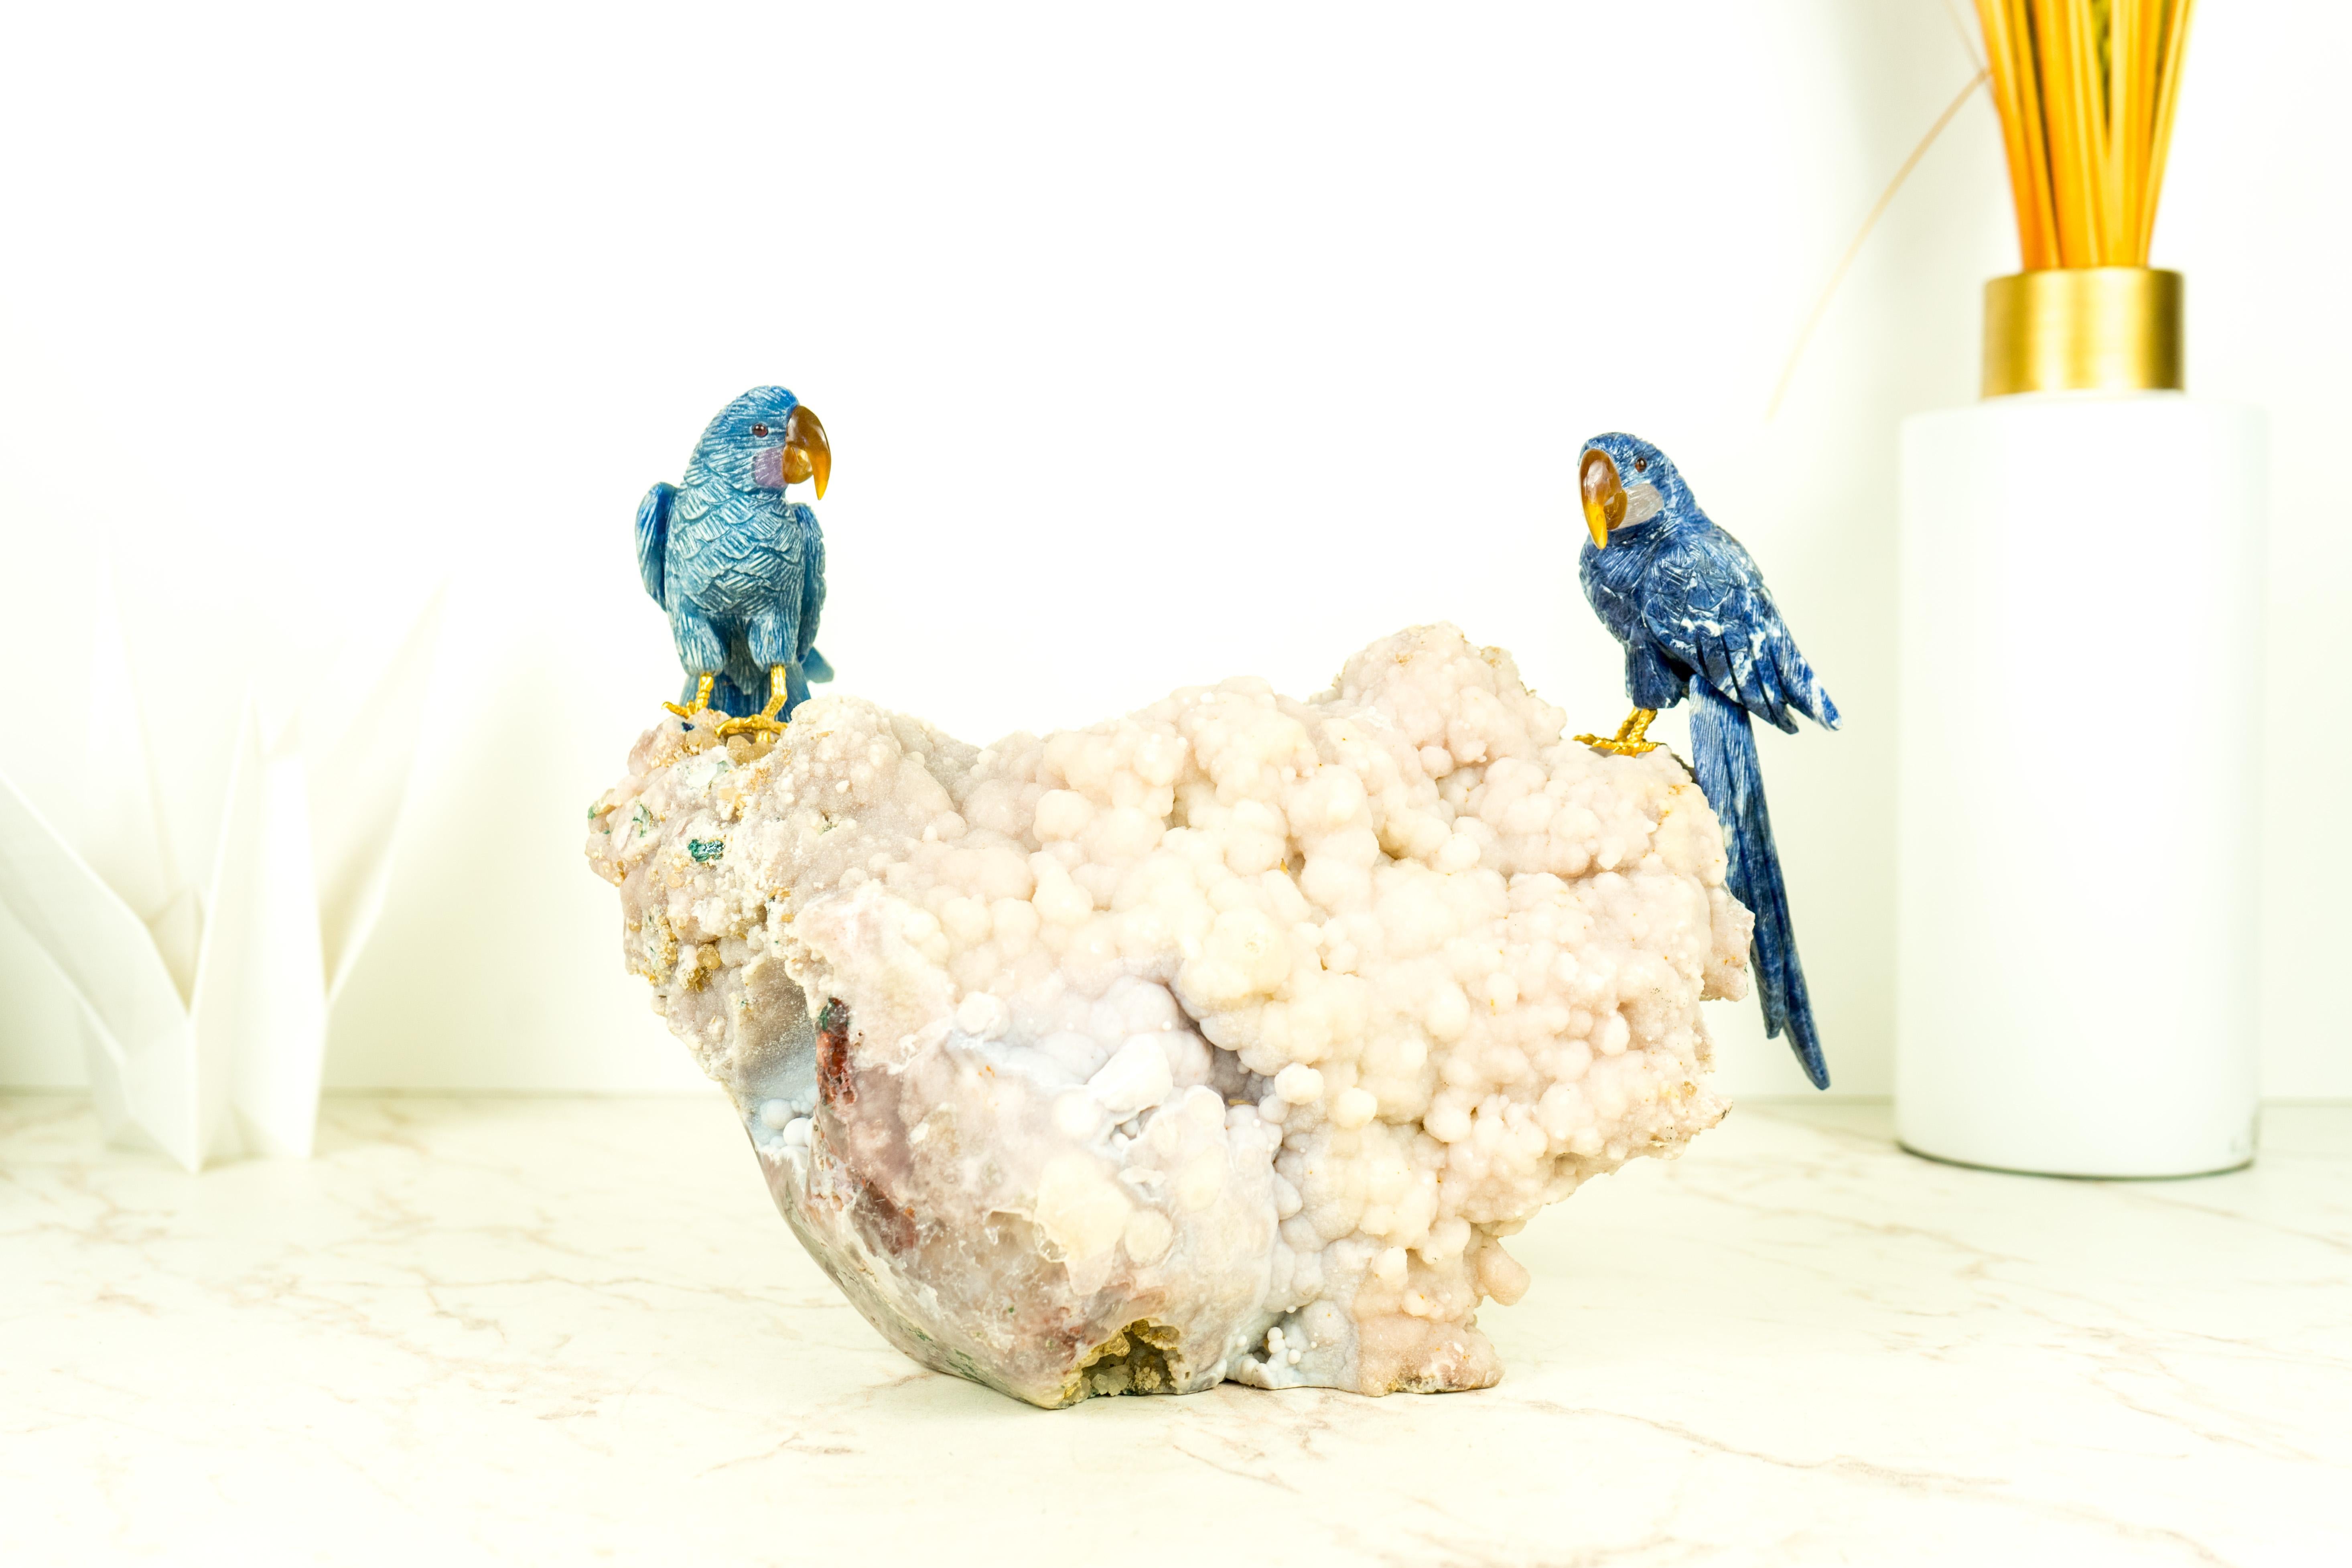 Depicting a charming couple of parrots, this piece by the world-renowned carver Venturini draws inspiration from Brazilian fauna and is crafted exclusively from the finest Brazilian Sodalite Quartz. This artwork will surely embellish any space,